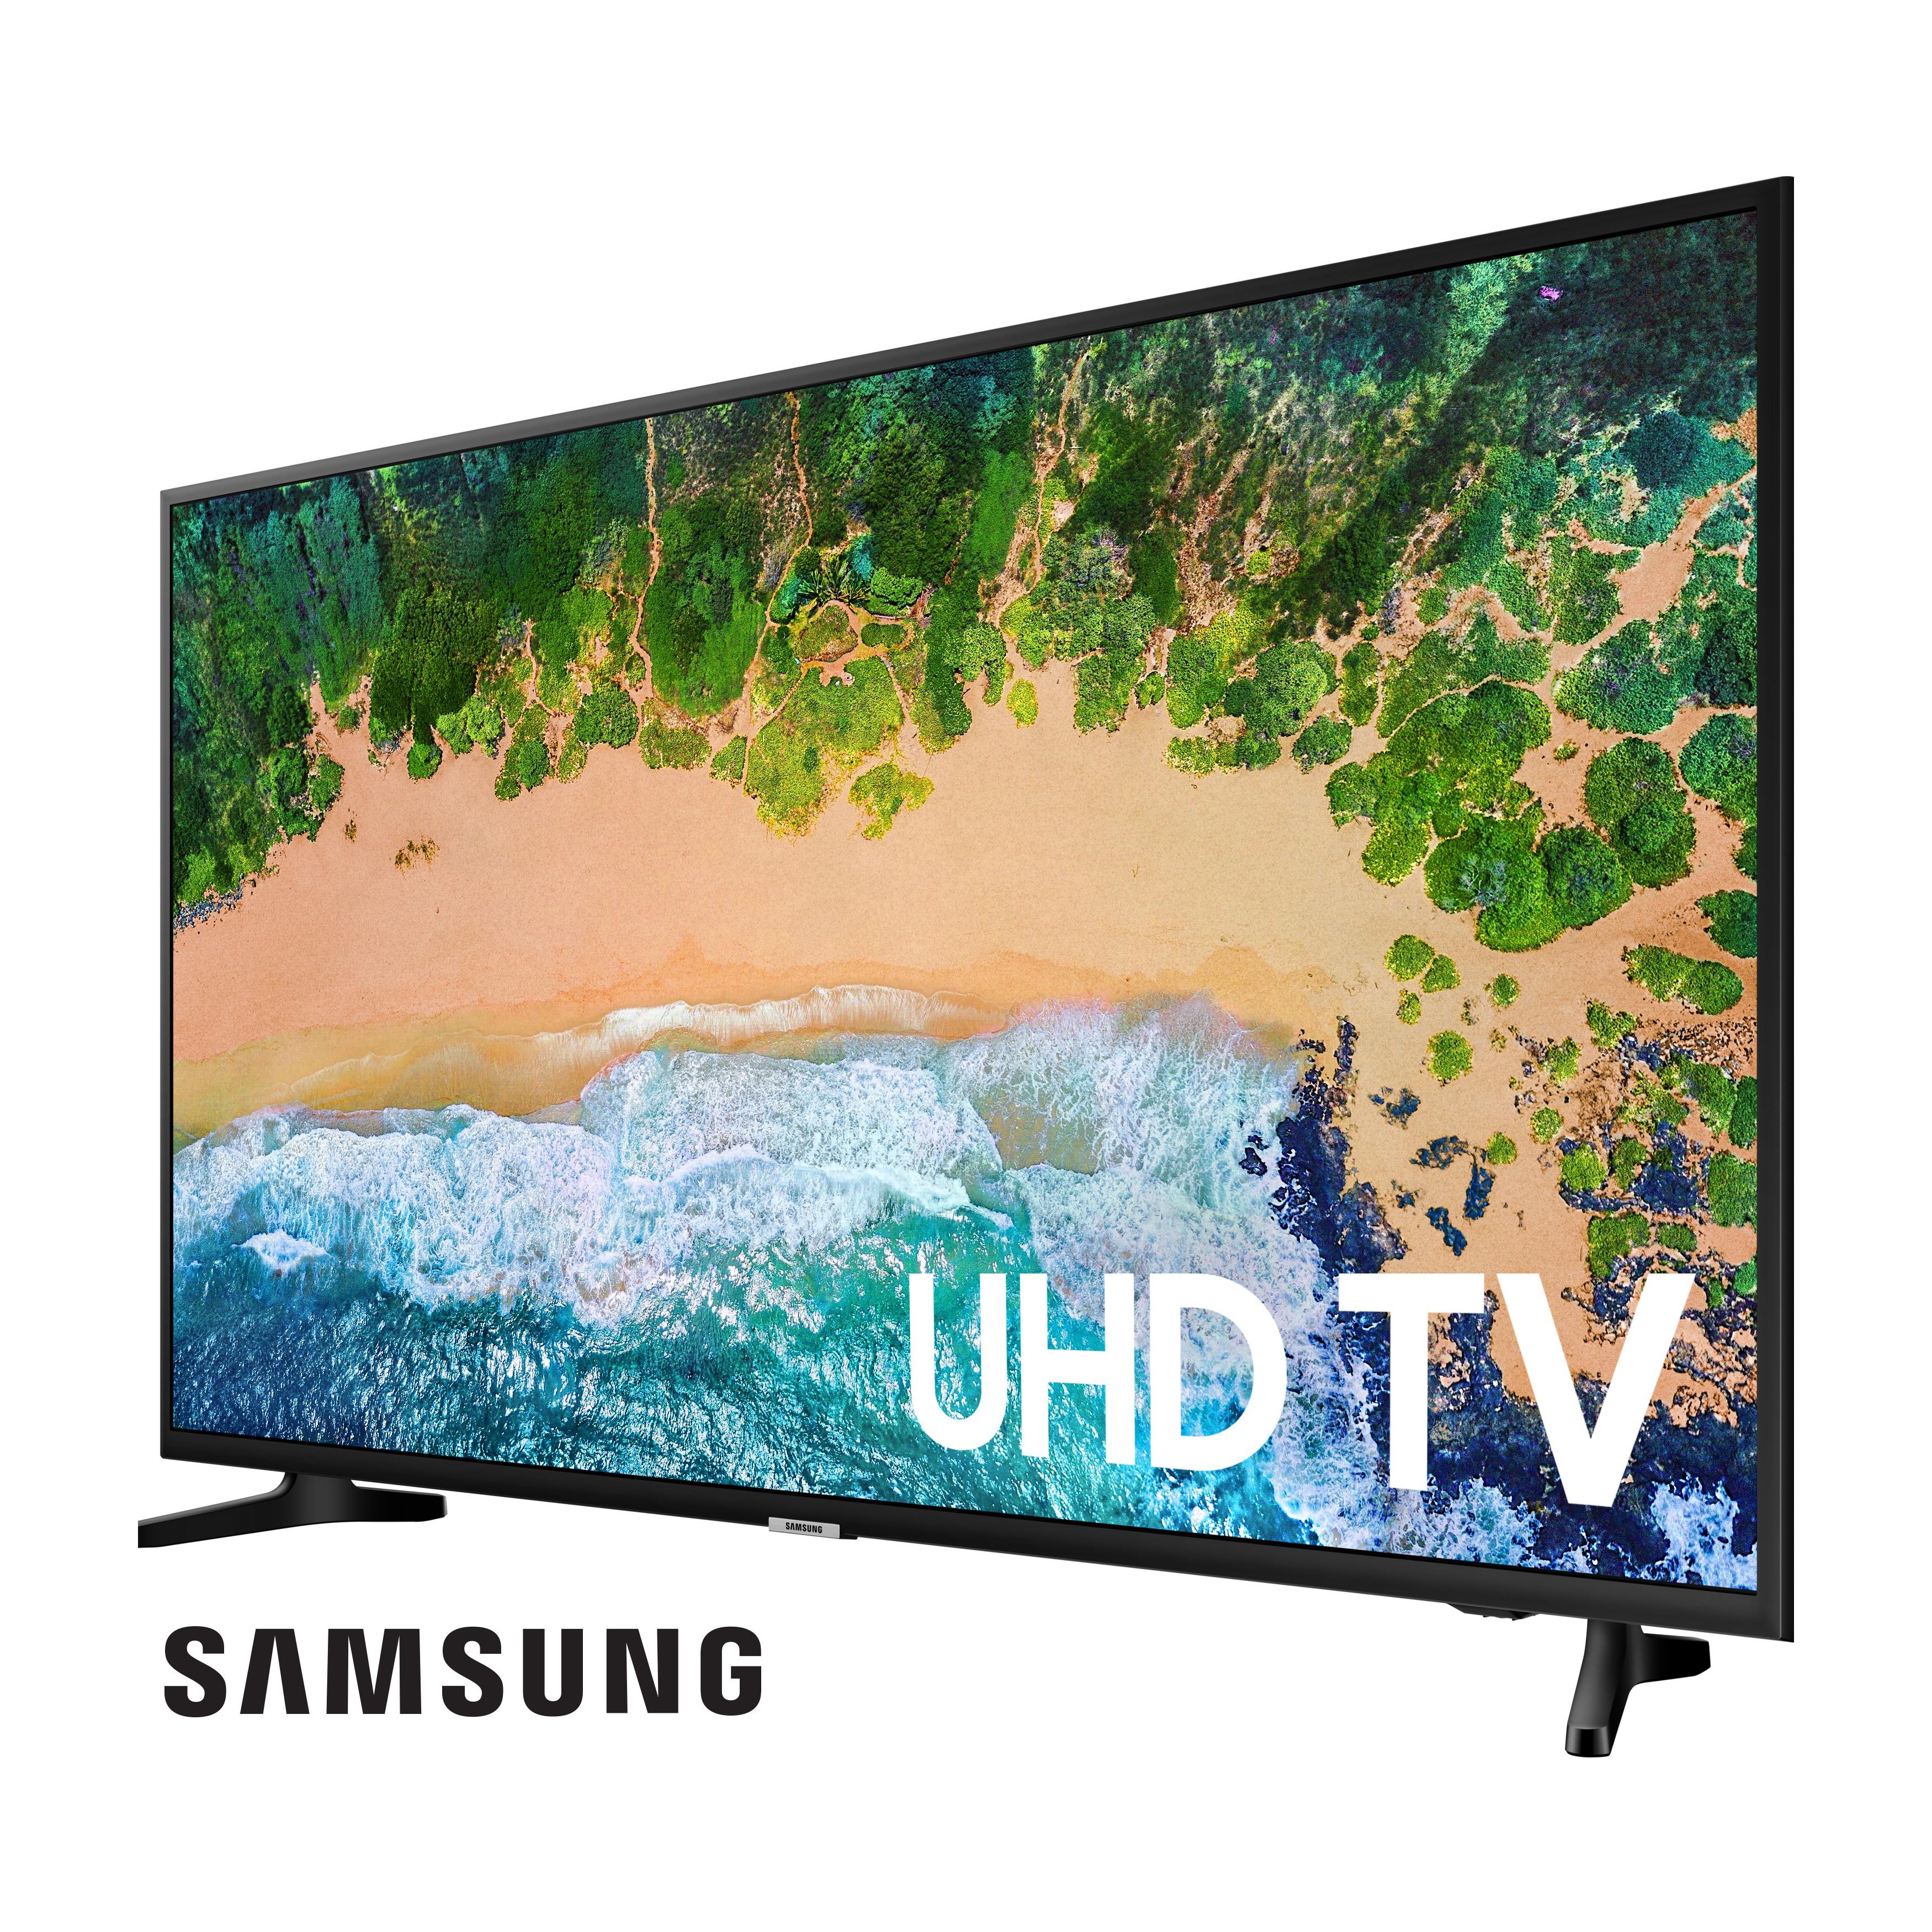 SAMSUNG 65" Class 4K UHD 2160p LED Smart TV with HDR UN65NU6900 - image 4 of 20